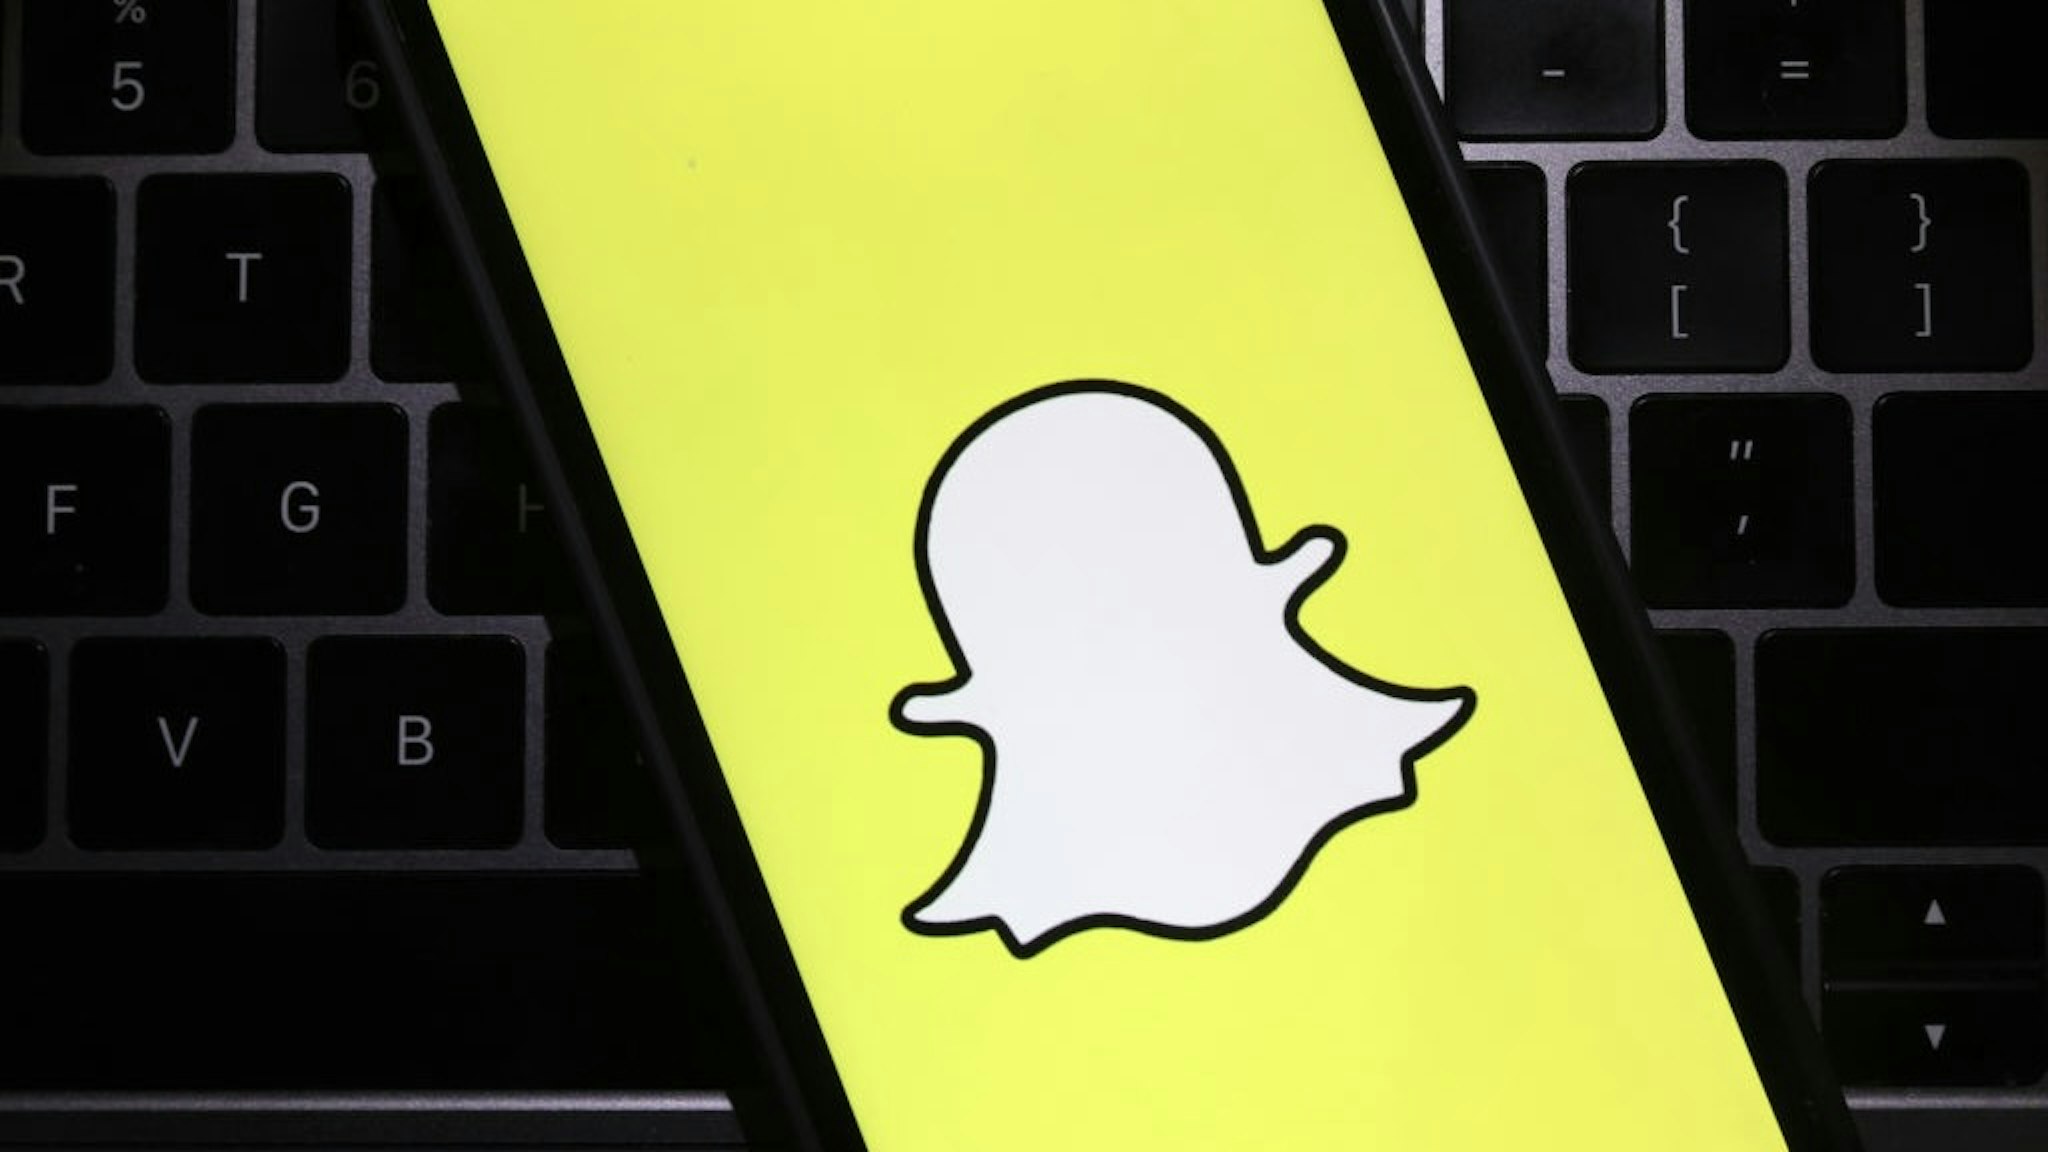 Snapchat Shares Jump On Strong Earnings Report SAN ANSELMO, CALIFORNIA - FEBRUARY 03: In this photo illustration, the Snapchat logo is displayed on a cell phone screen on February 03, 2022 in San Anselmo, California. Shares of Snapchat surged in after hours trading after the company reported a better-than-expected fourth quarter earnings. (Photo illustration by Justin Sullivan/Getty Images) Justin Sullivan / Staff